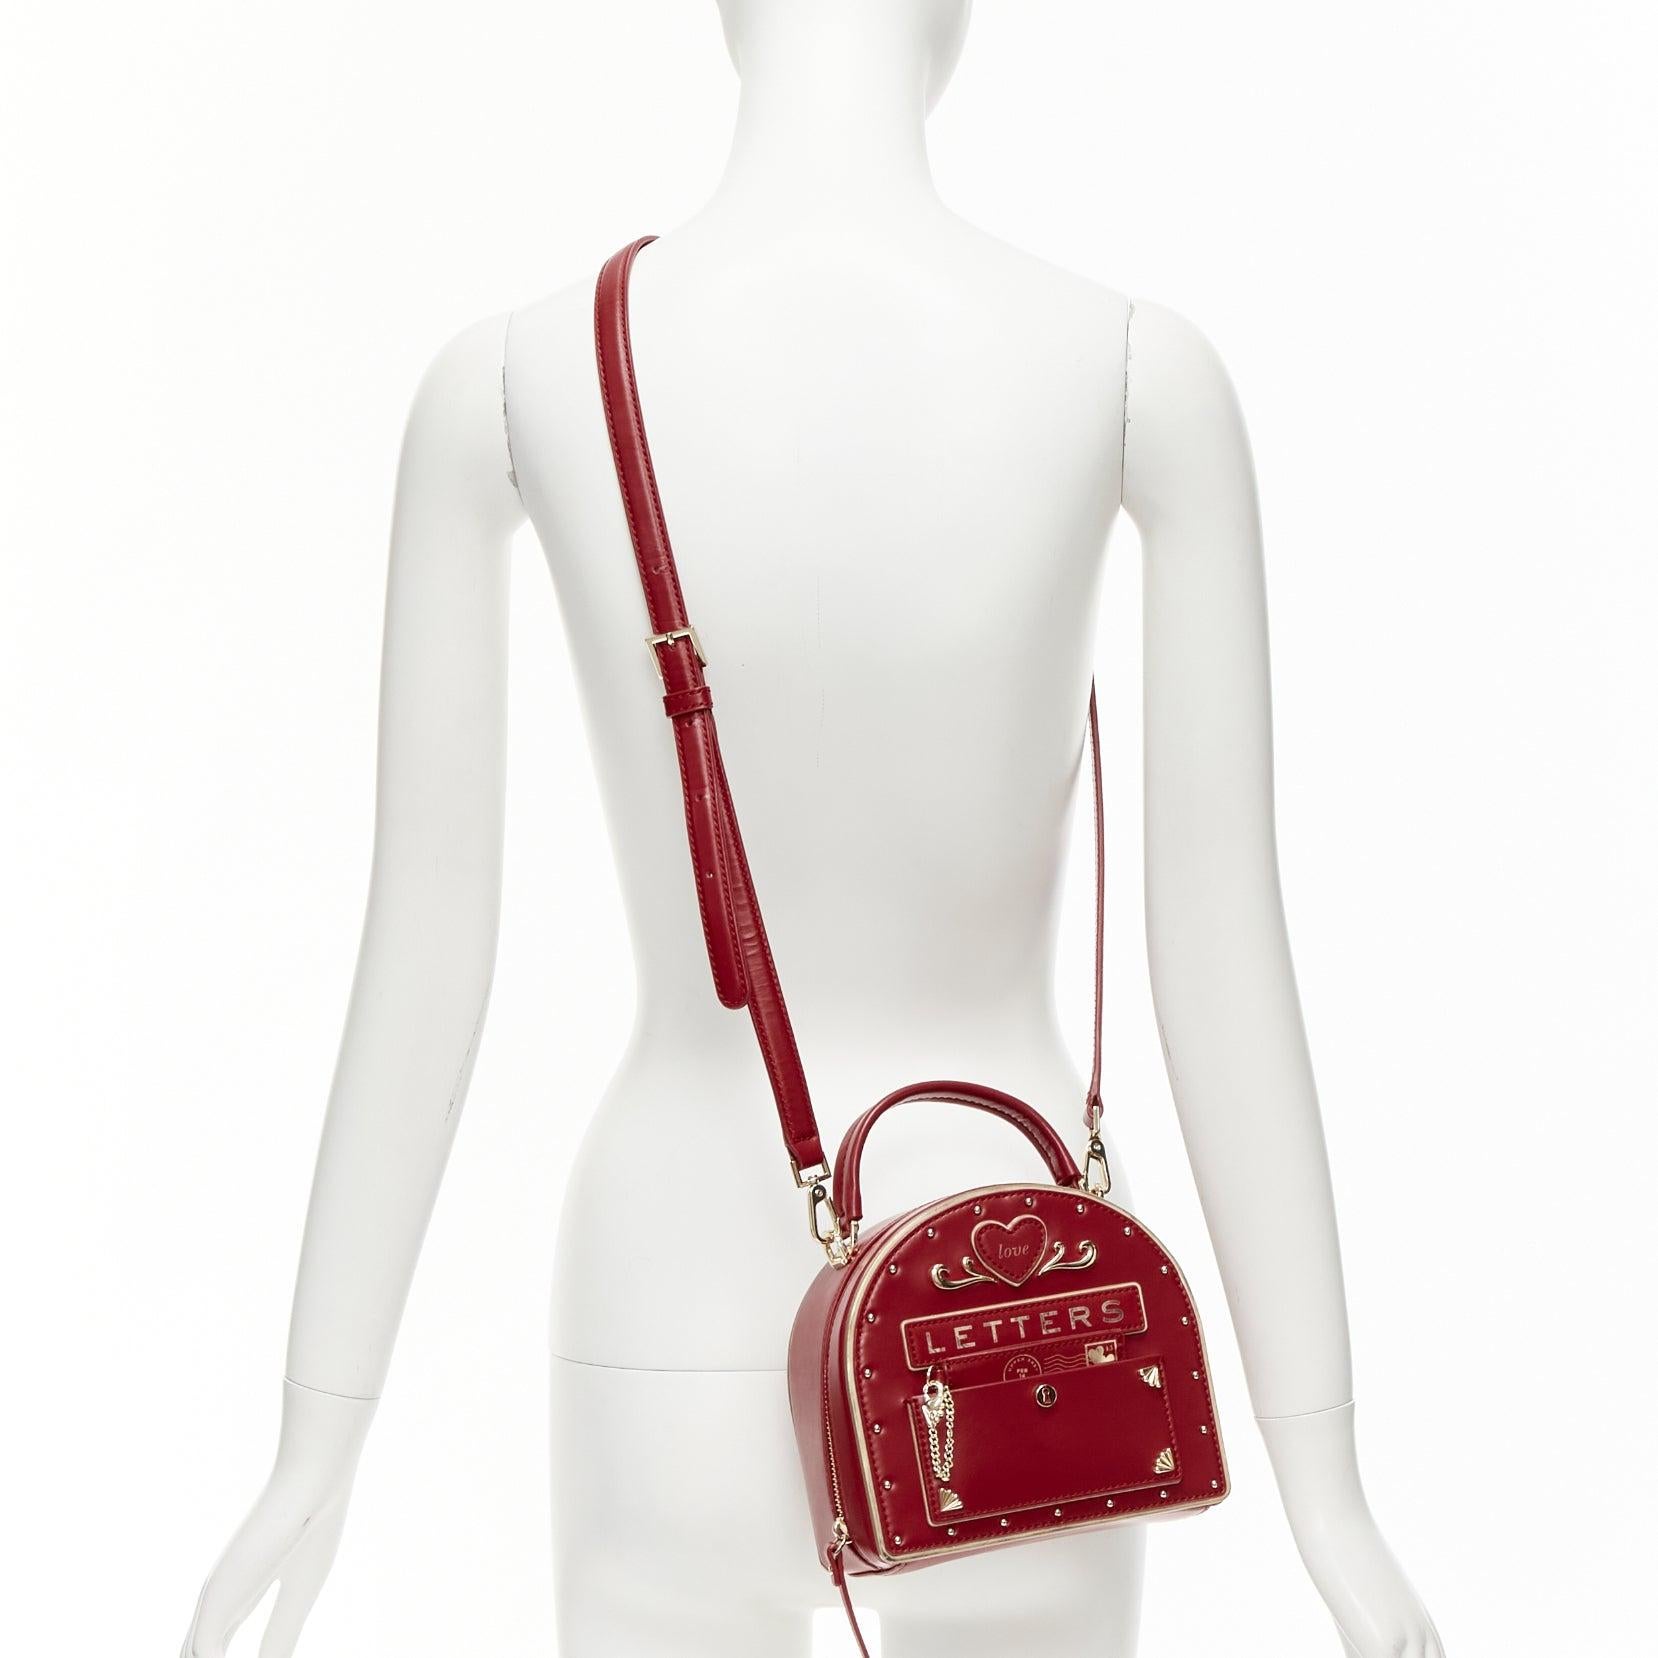 KATE SPADE Yours Truly Rot Gold piping love letter E-Mailbox Umhängetasche Crossbody Waschtischtasche
Referenz: TGAS/D01106
Marke: Kate Spade
Modell: Dein wahres Ich
MATERIAL: Leder
Farbe: Gold, Rot
Muster: Solide
Verschluss: